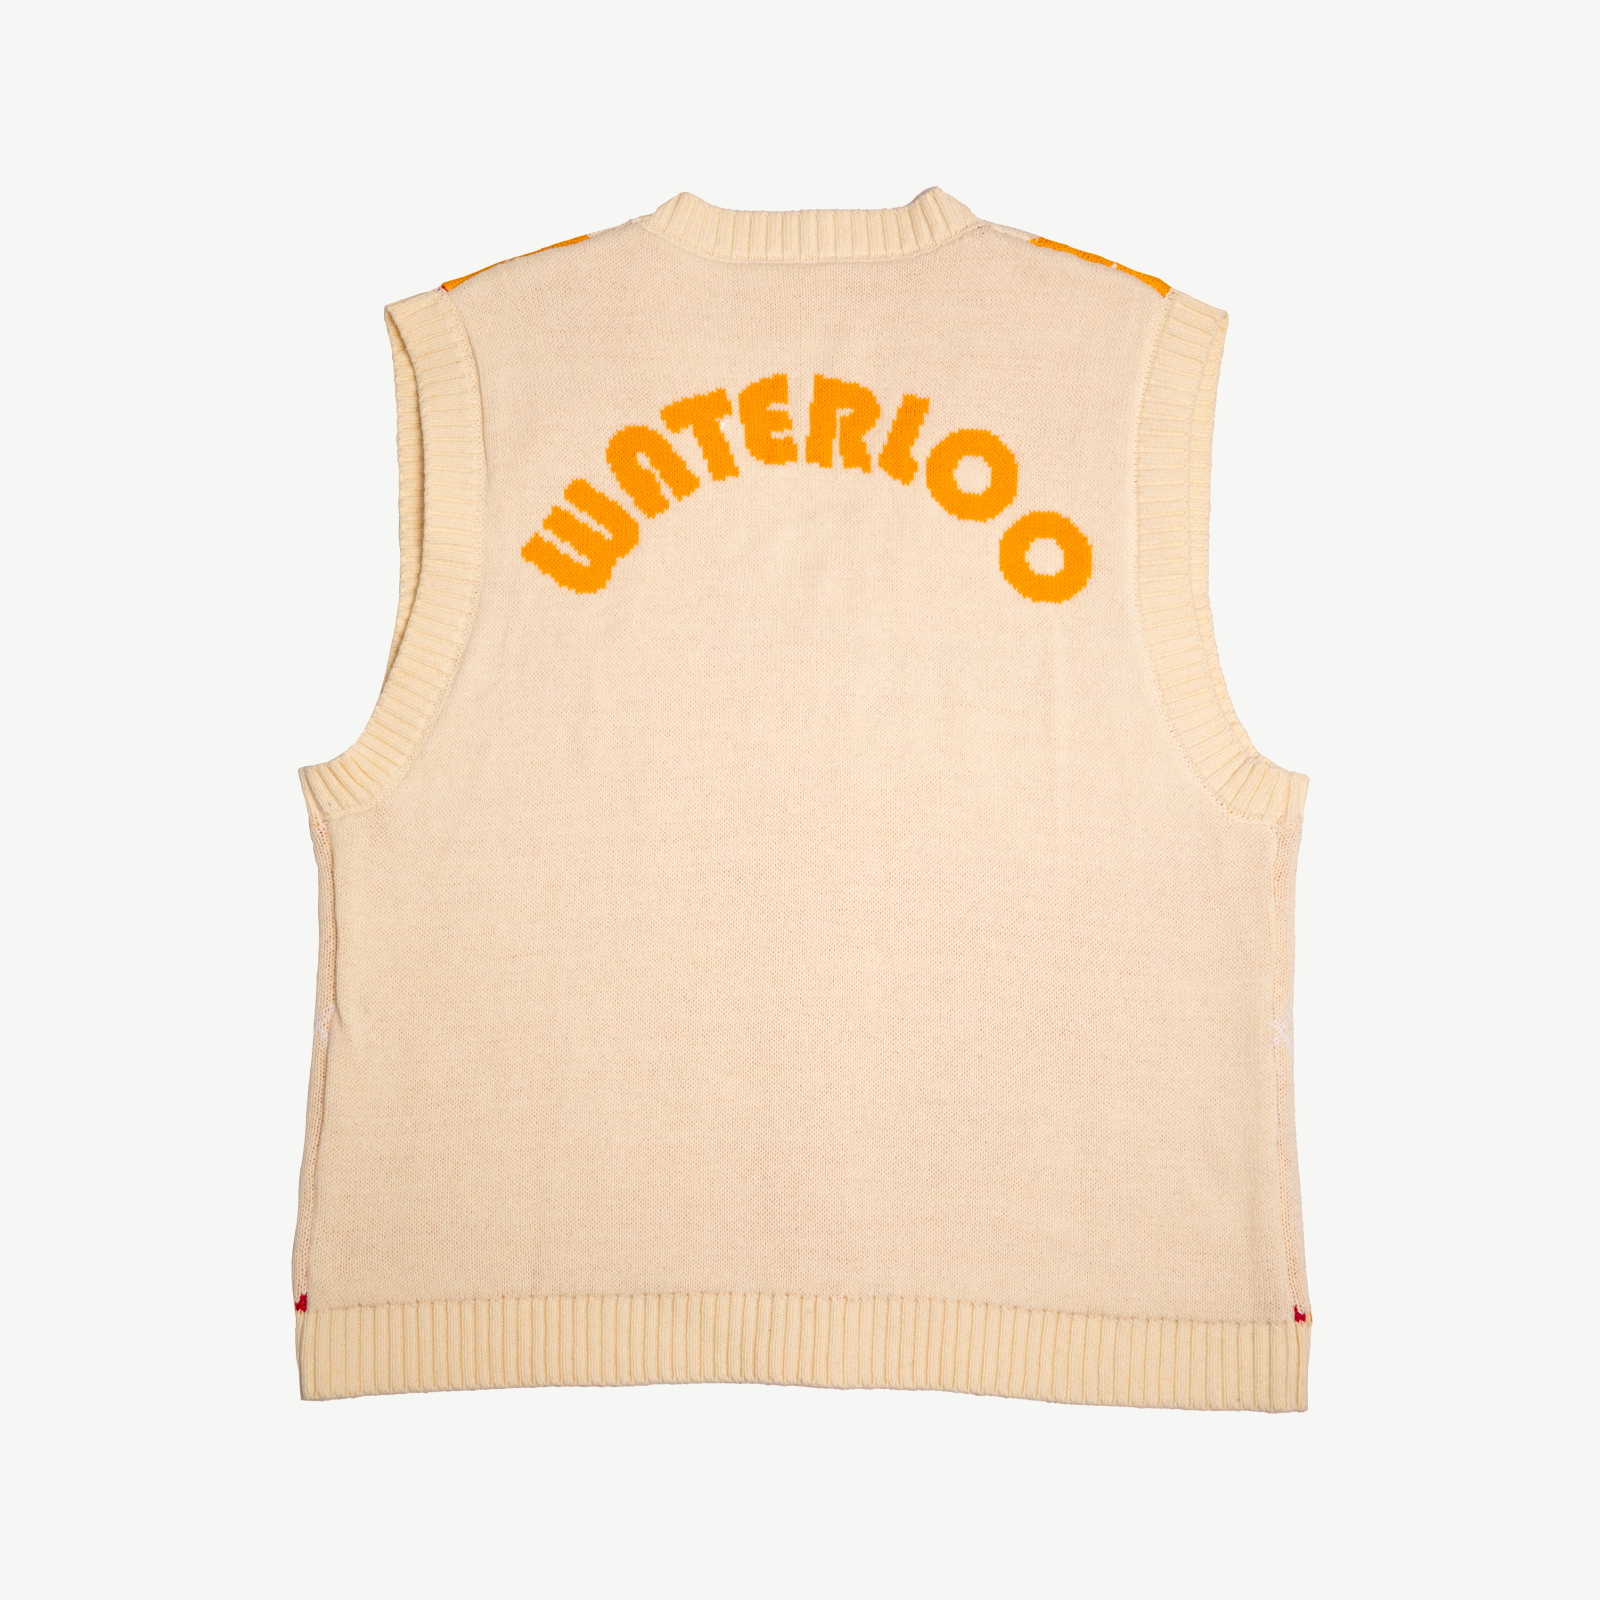 Waterloo Knitted Vest back